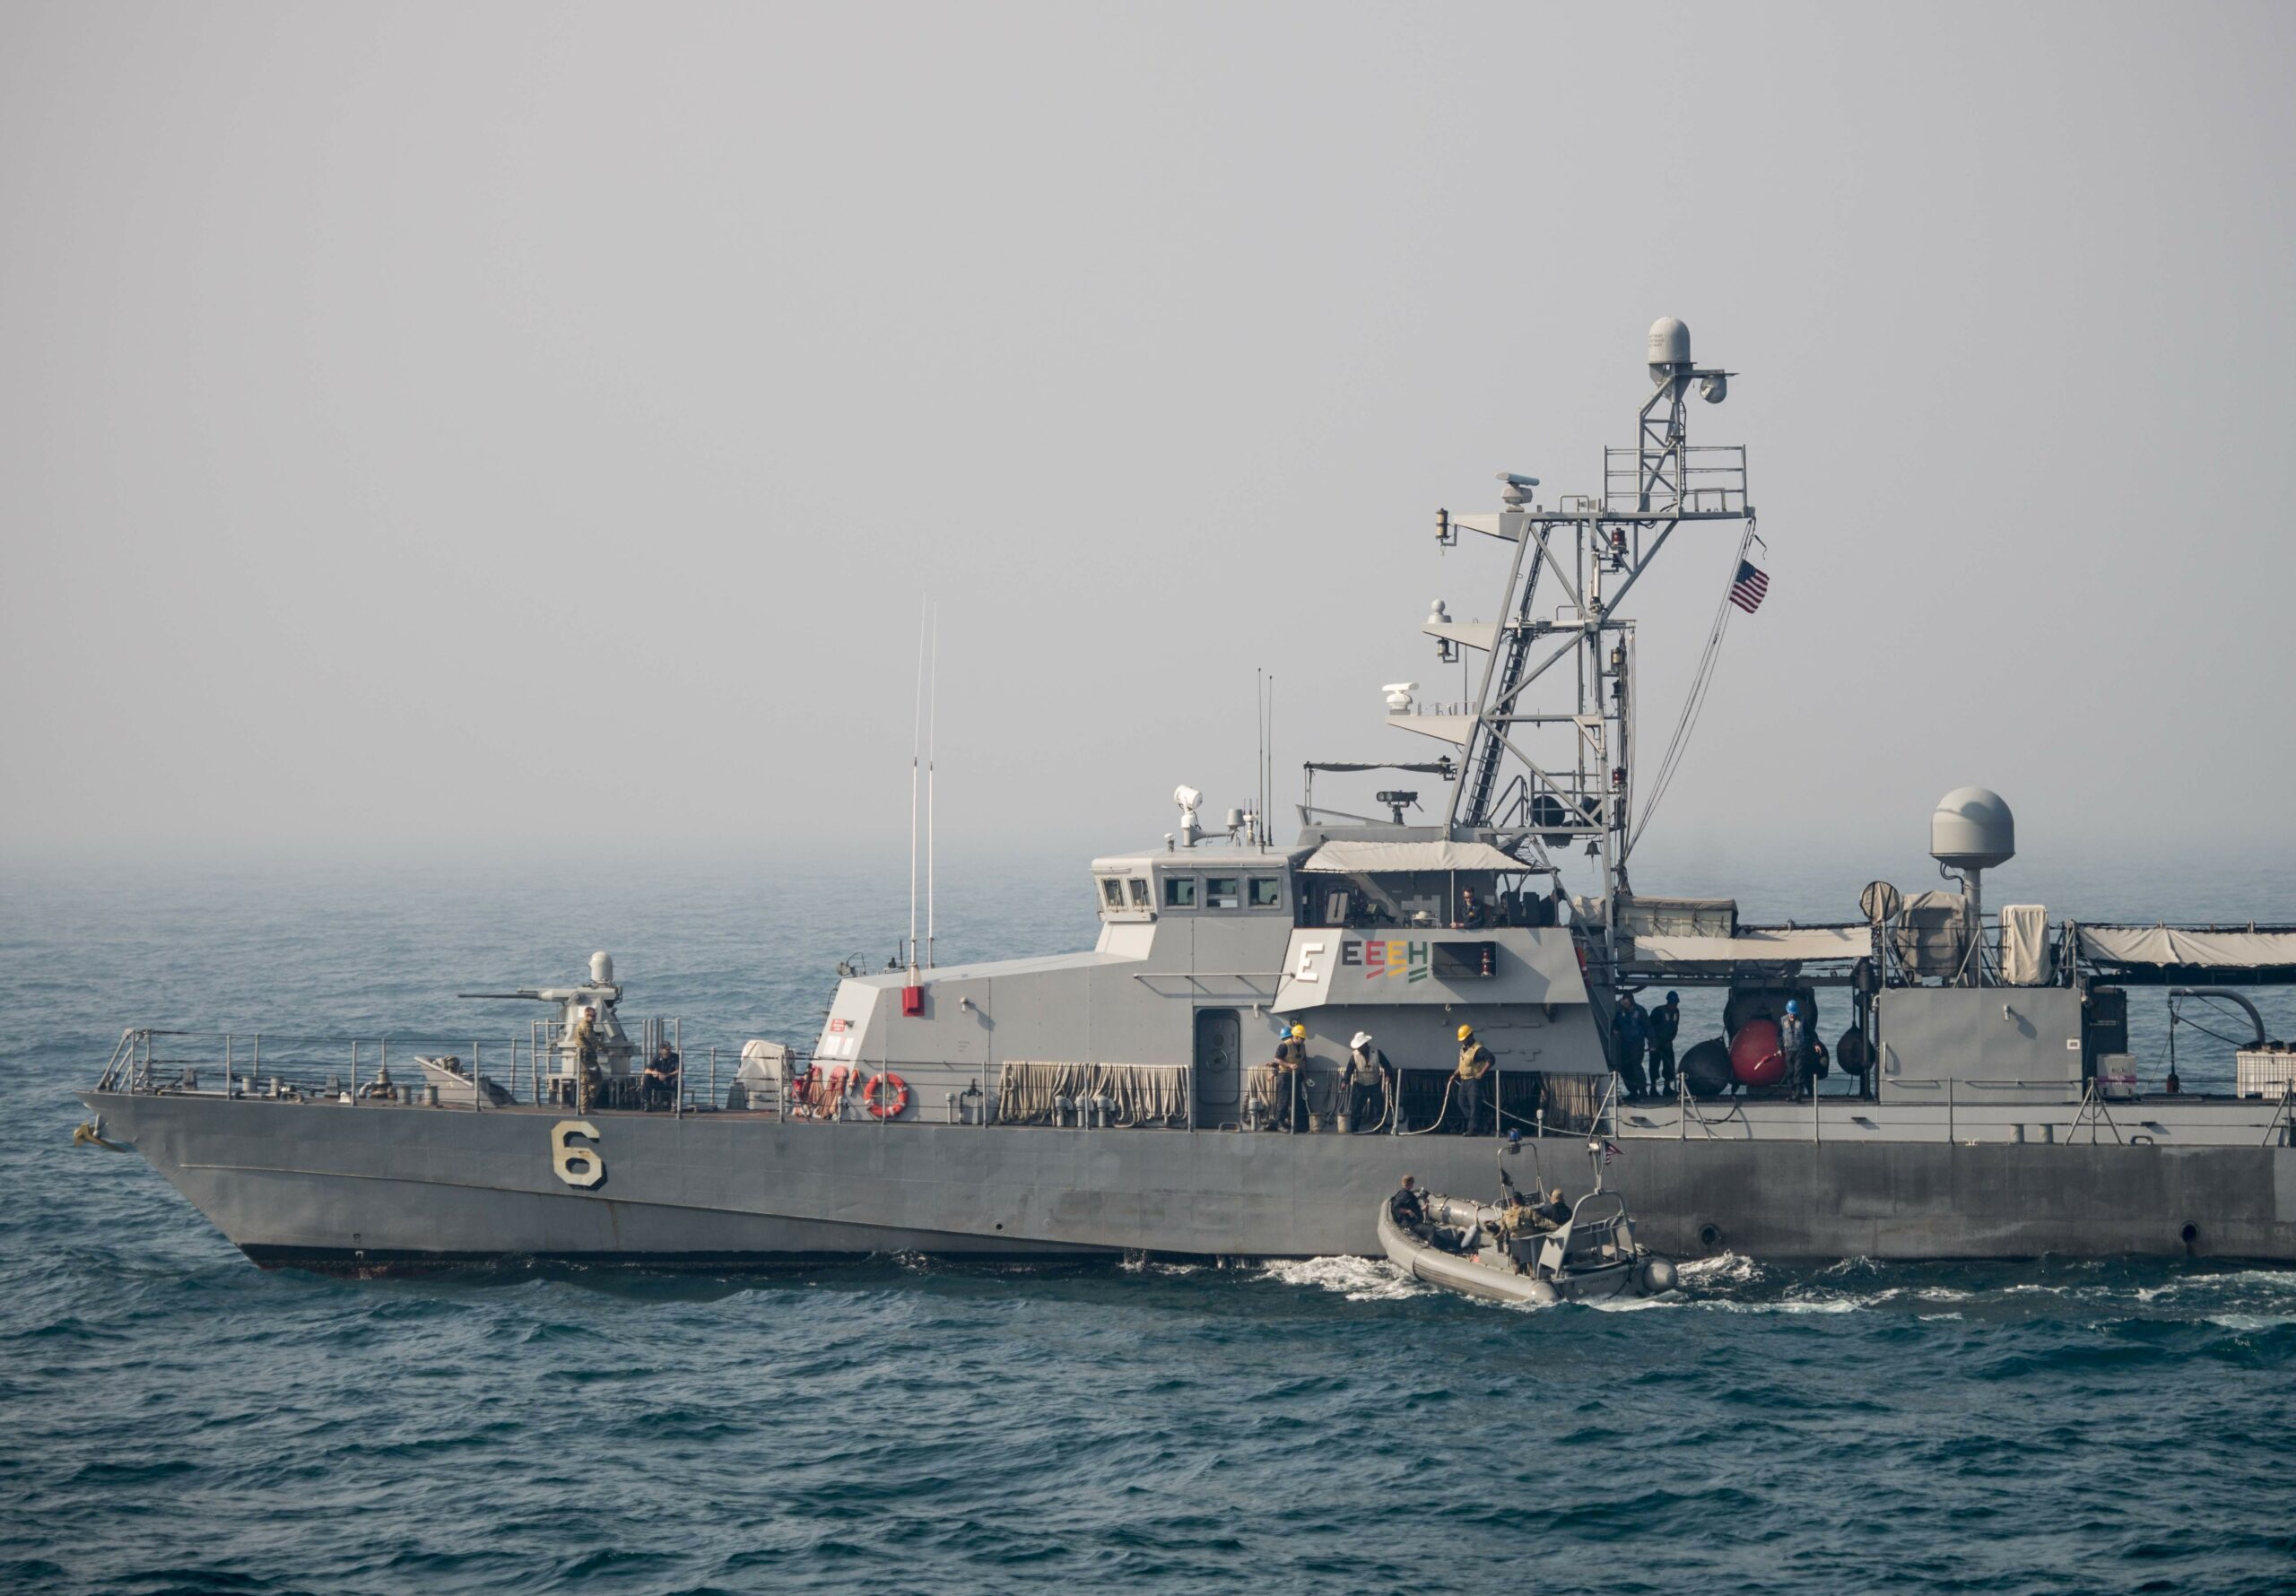 160119-N-BJ294-004 ARABIAN GULF (Jan. 19, 2016) A rigid hull inflatable boat approaches the patrol craft USS Sirocco (PC 6) assigned to Commander, Task Force (CTF) 55 during a bilateral exercise with the Iraqi Navy. CTF 55 controls surface forces such as U.S. Navy patrol craft and U.S. Coast Guard patrol boats throughout the U.S. 5th Fleet area of operations. (U.S. Navy Combat Camera photo by Mass Communication Specialist 2nd Class Wyatt Huggett/Released)